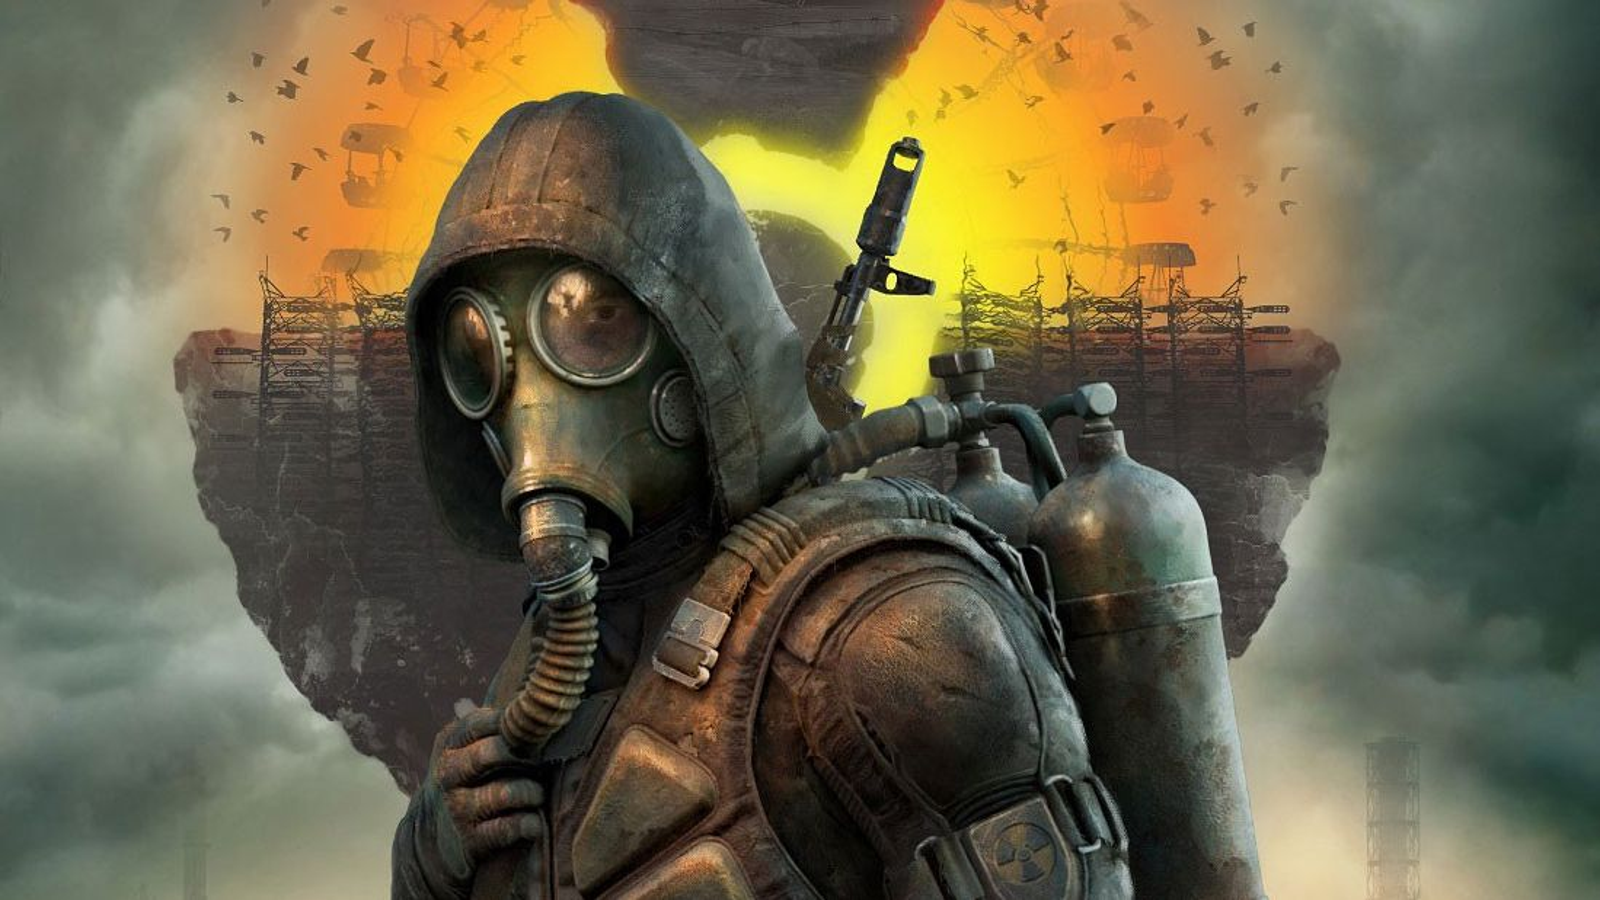 S.T.A.L.K.E.R. 2: Heart of Chornobyl — Official 'Come to Me